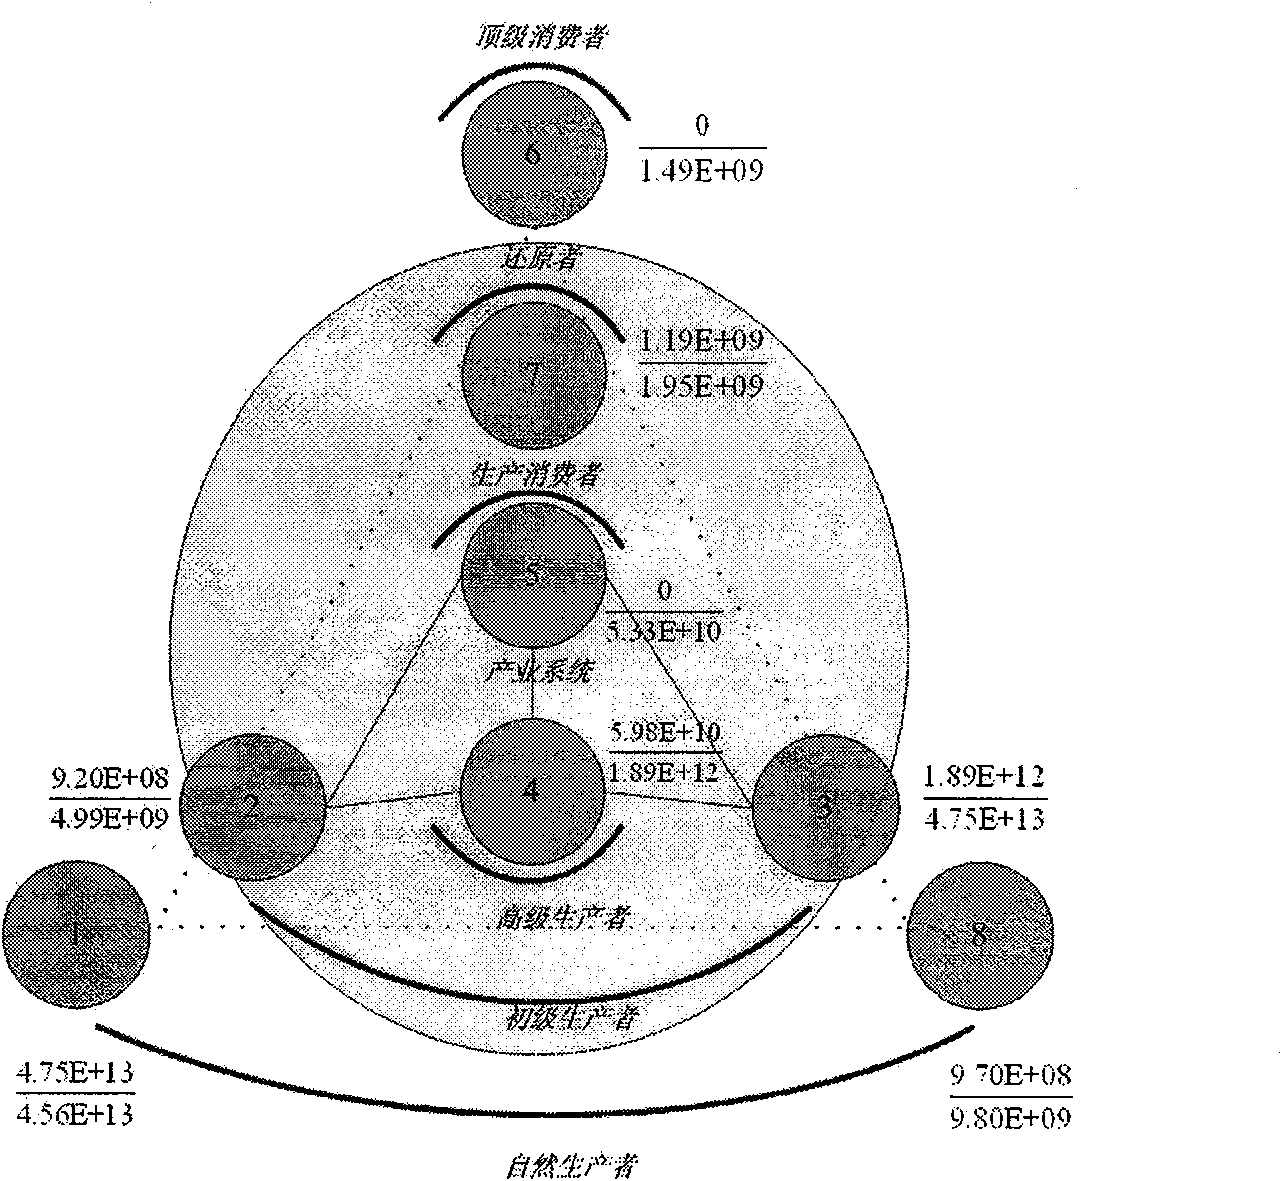 Analysis method for local area ecological network